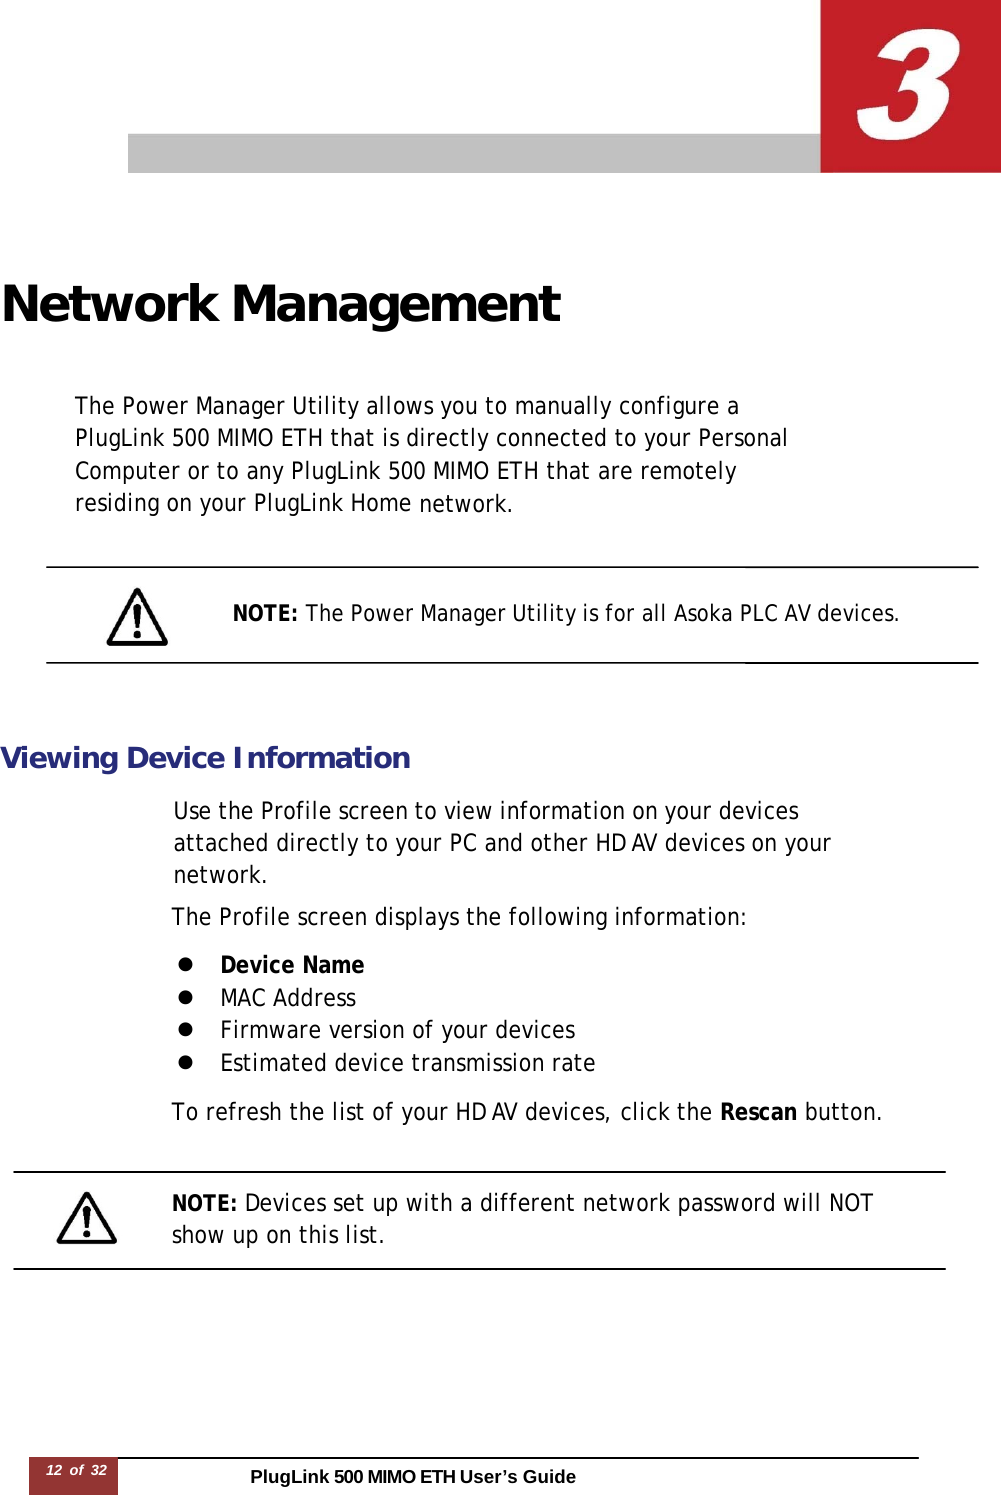 PlugLink 500 MIMO ETH User’s Guide12 of 32        Network Management   The Power Manager Utility allows you to manually configure a PlugLink 500 MIMO ETH that is directly connected to your Personal Computer or to any PlugLink 500 MIMO ETH that are remotely residing on your PlugLink Home network.     NOTE: The Power Manager Utility is for all Asoka PLC AV devices.     Viewing Device Information  Use the Profile screen to view information on your devices attached directly to your PC and other HD AV devices on your network. The Profile screen displays the following information:  z  Device Name z  MAC Address z  Firmware version of your devices z  Estimated device transmission rate  To refresh the list of your HD AV devices, click the Rescan button.    NOTE: Devices set up with a different network password will NOT show up on this list. 